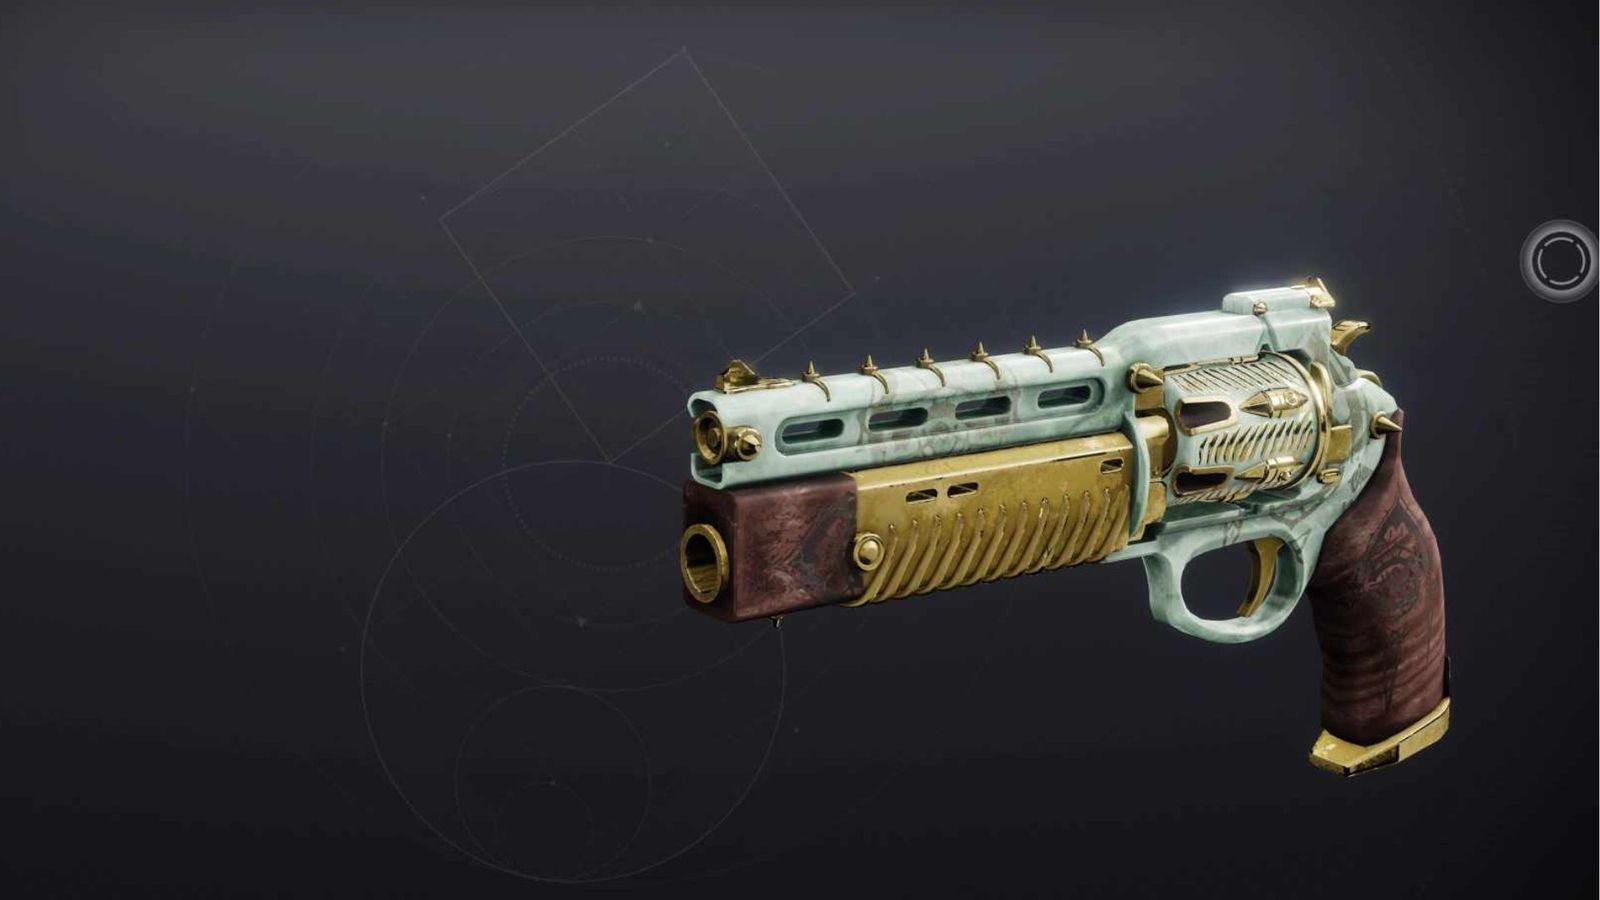 A hand cannon in destiny 2